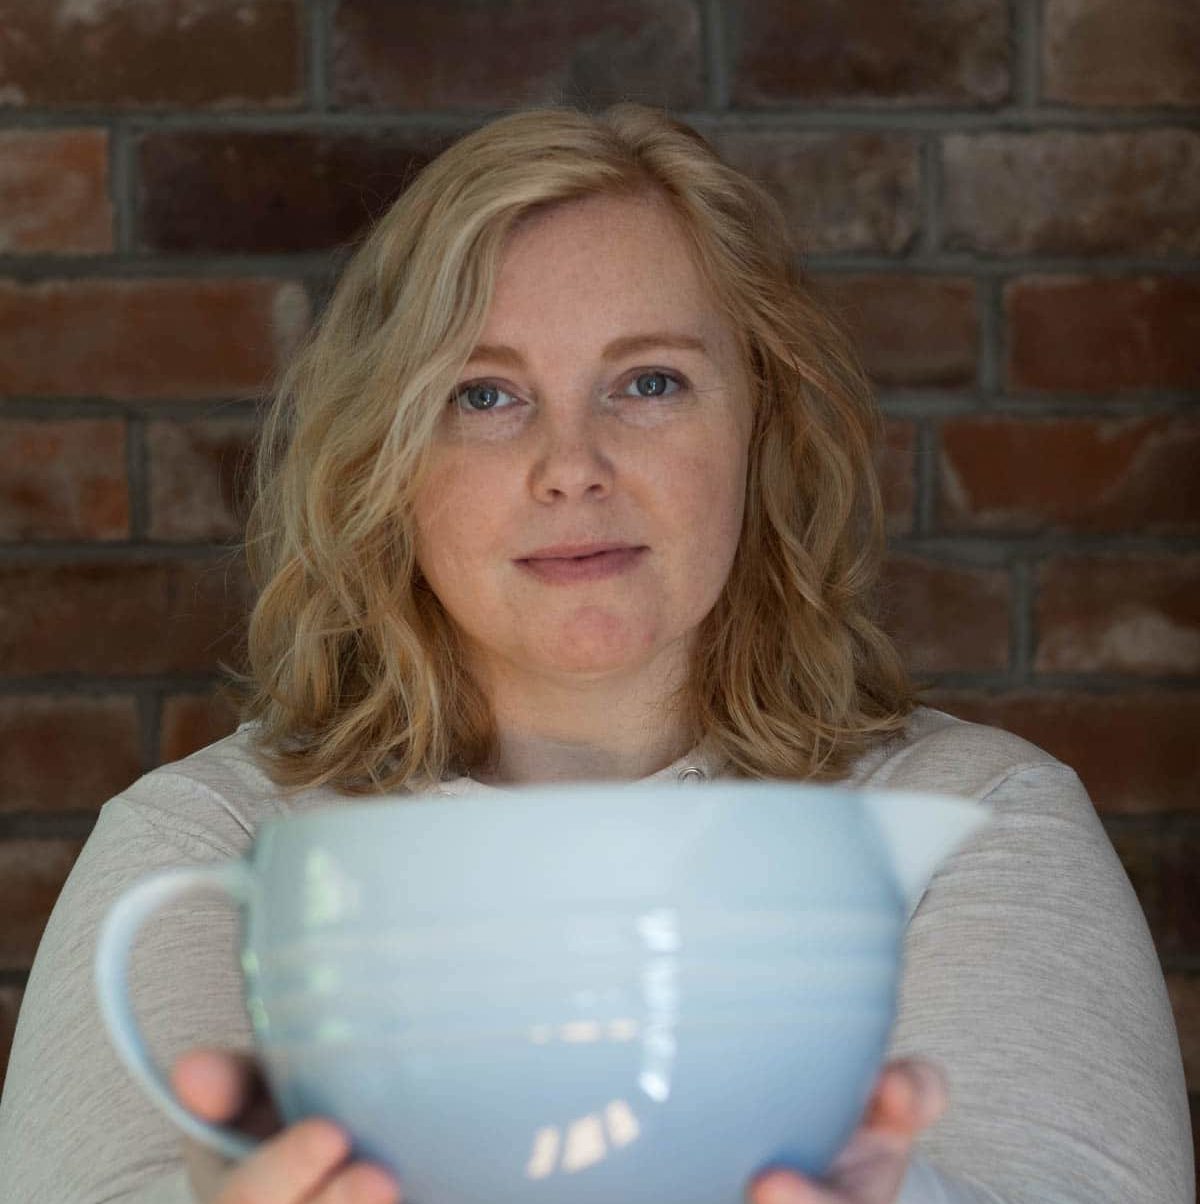 Woman holding a large mixing bowl